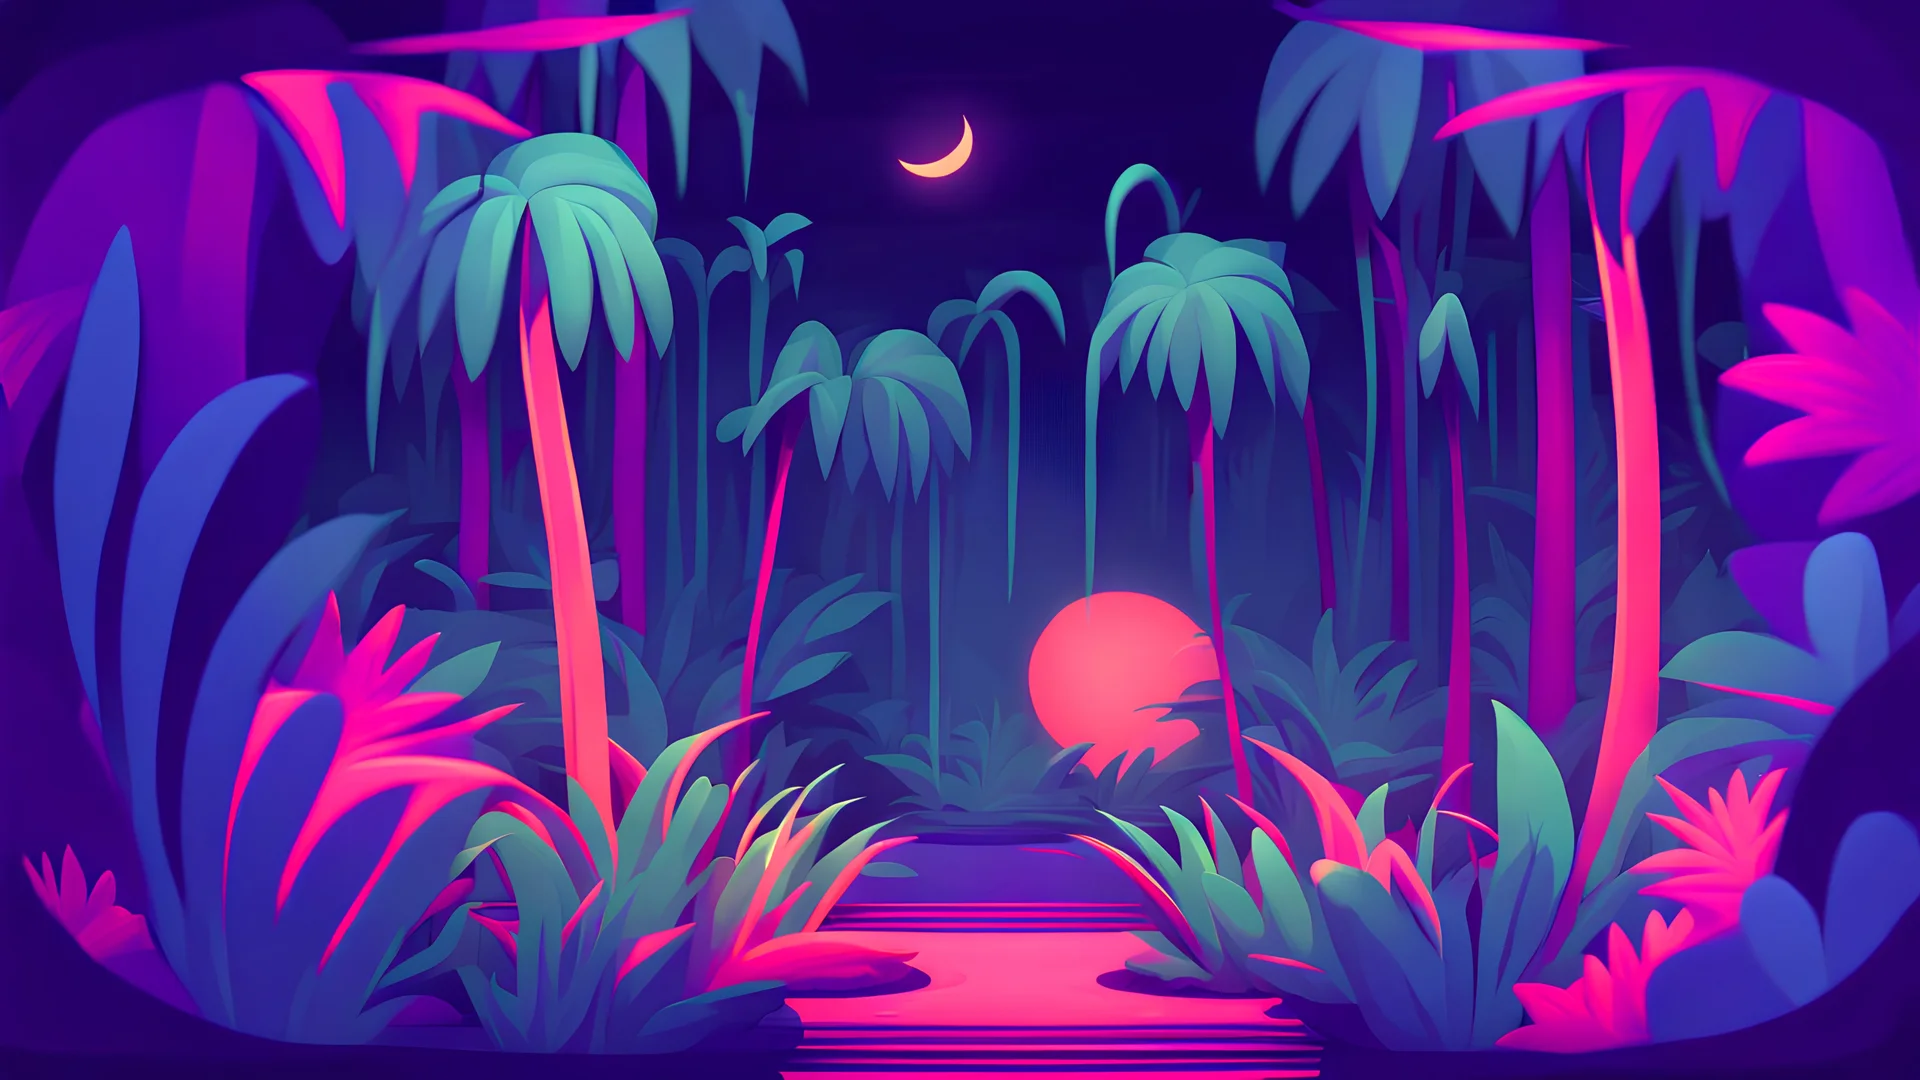 a front view of an art in surreal animations style that shows a jungle at night